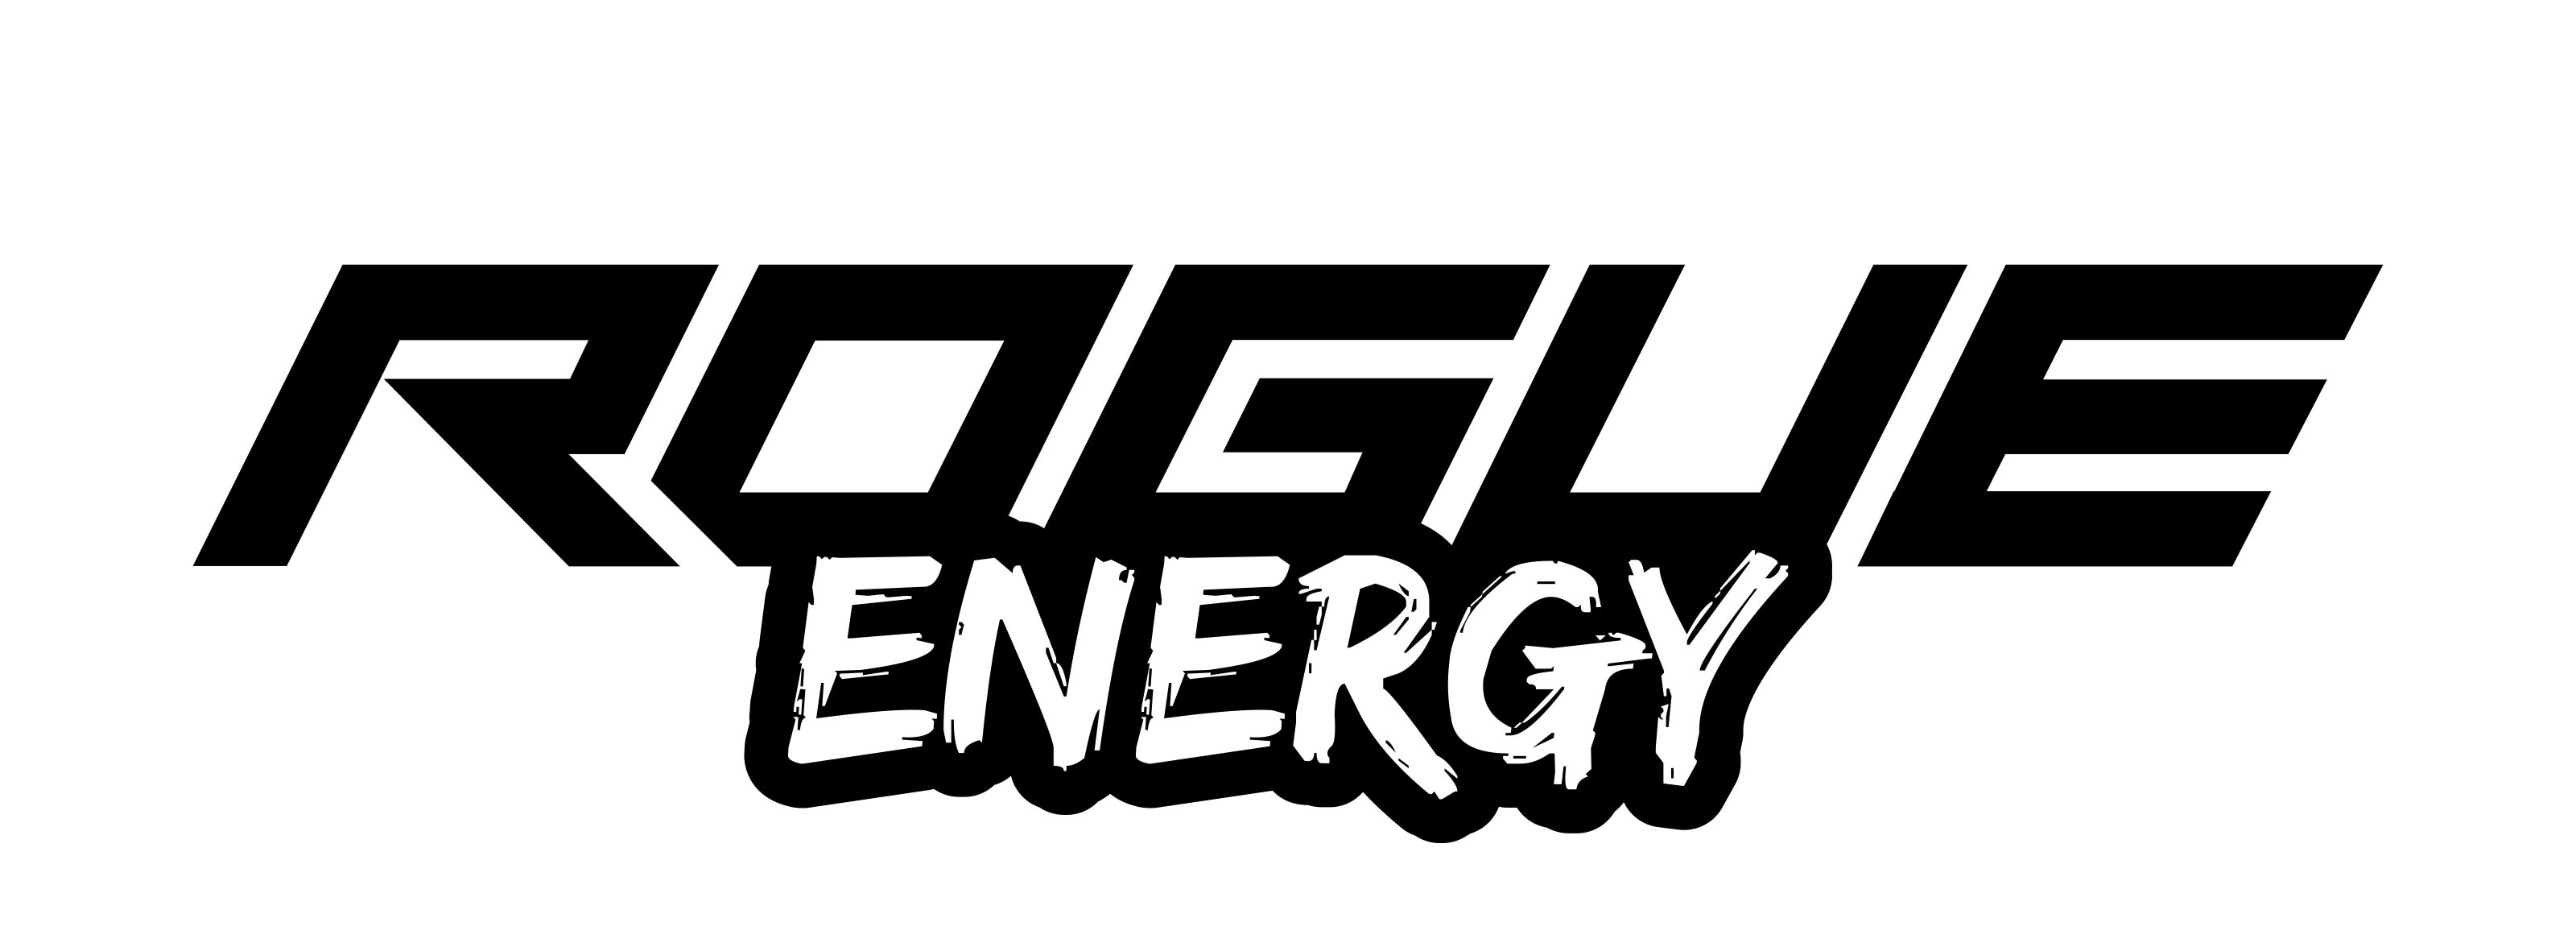 Rogue Energy - World's Best Gaming Energy Drink